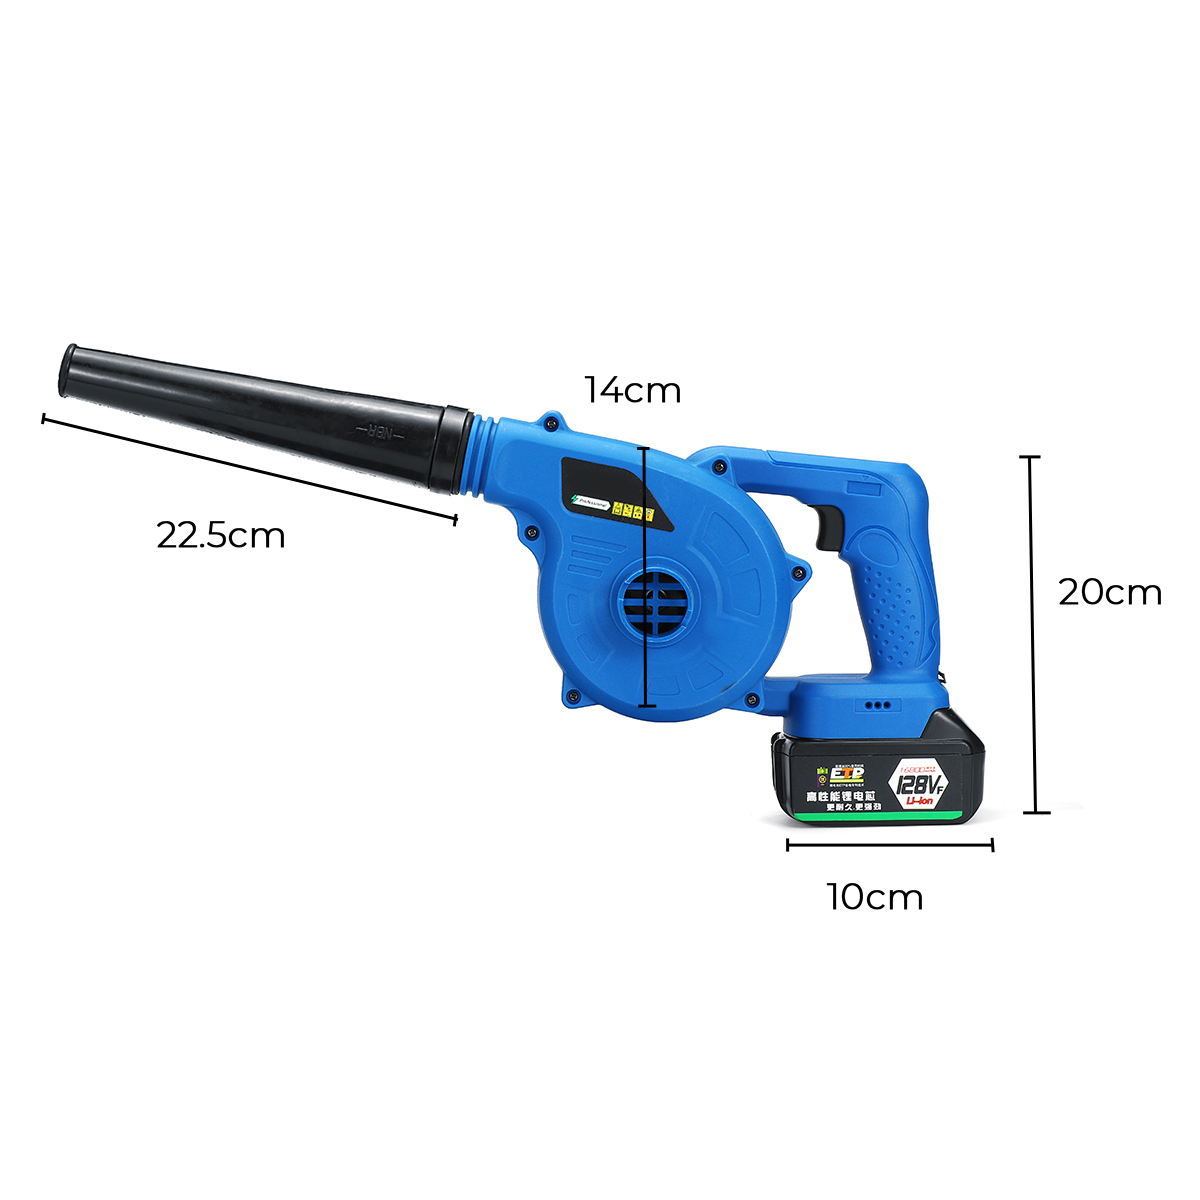 220v-1200W-Electric-Wireless-Handheld-Blower-Computer-Dust-Collector-Rechargeable-Lithium-One-Batter-1562214-9